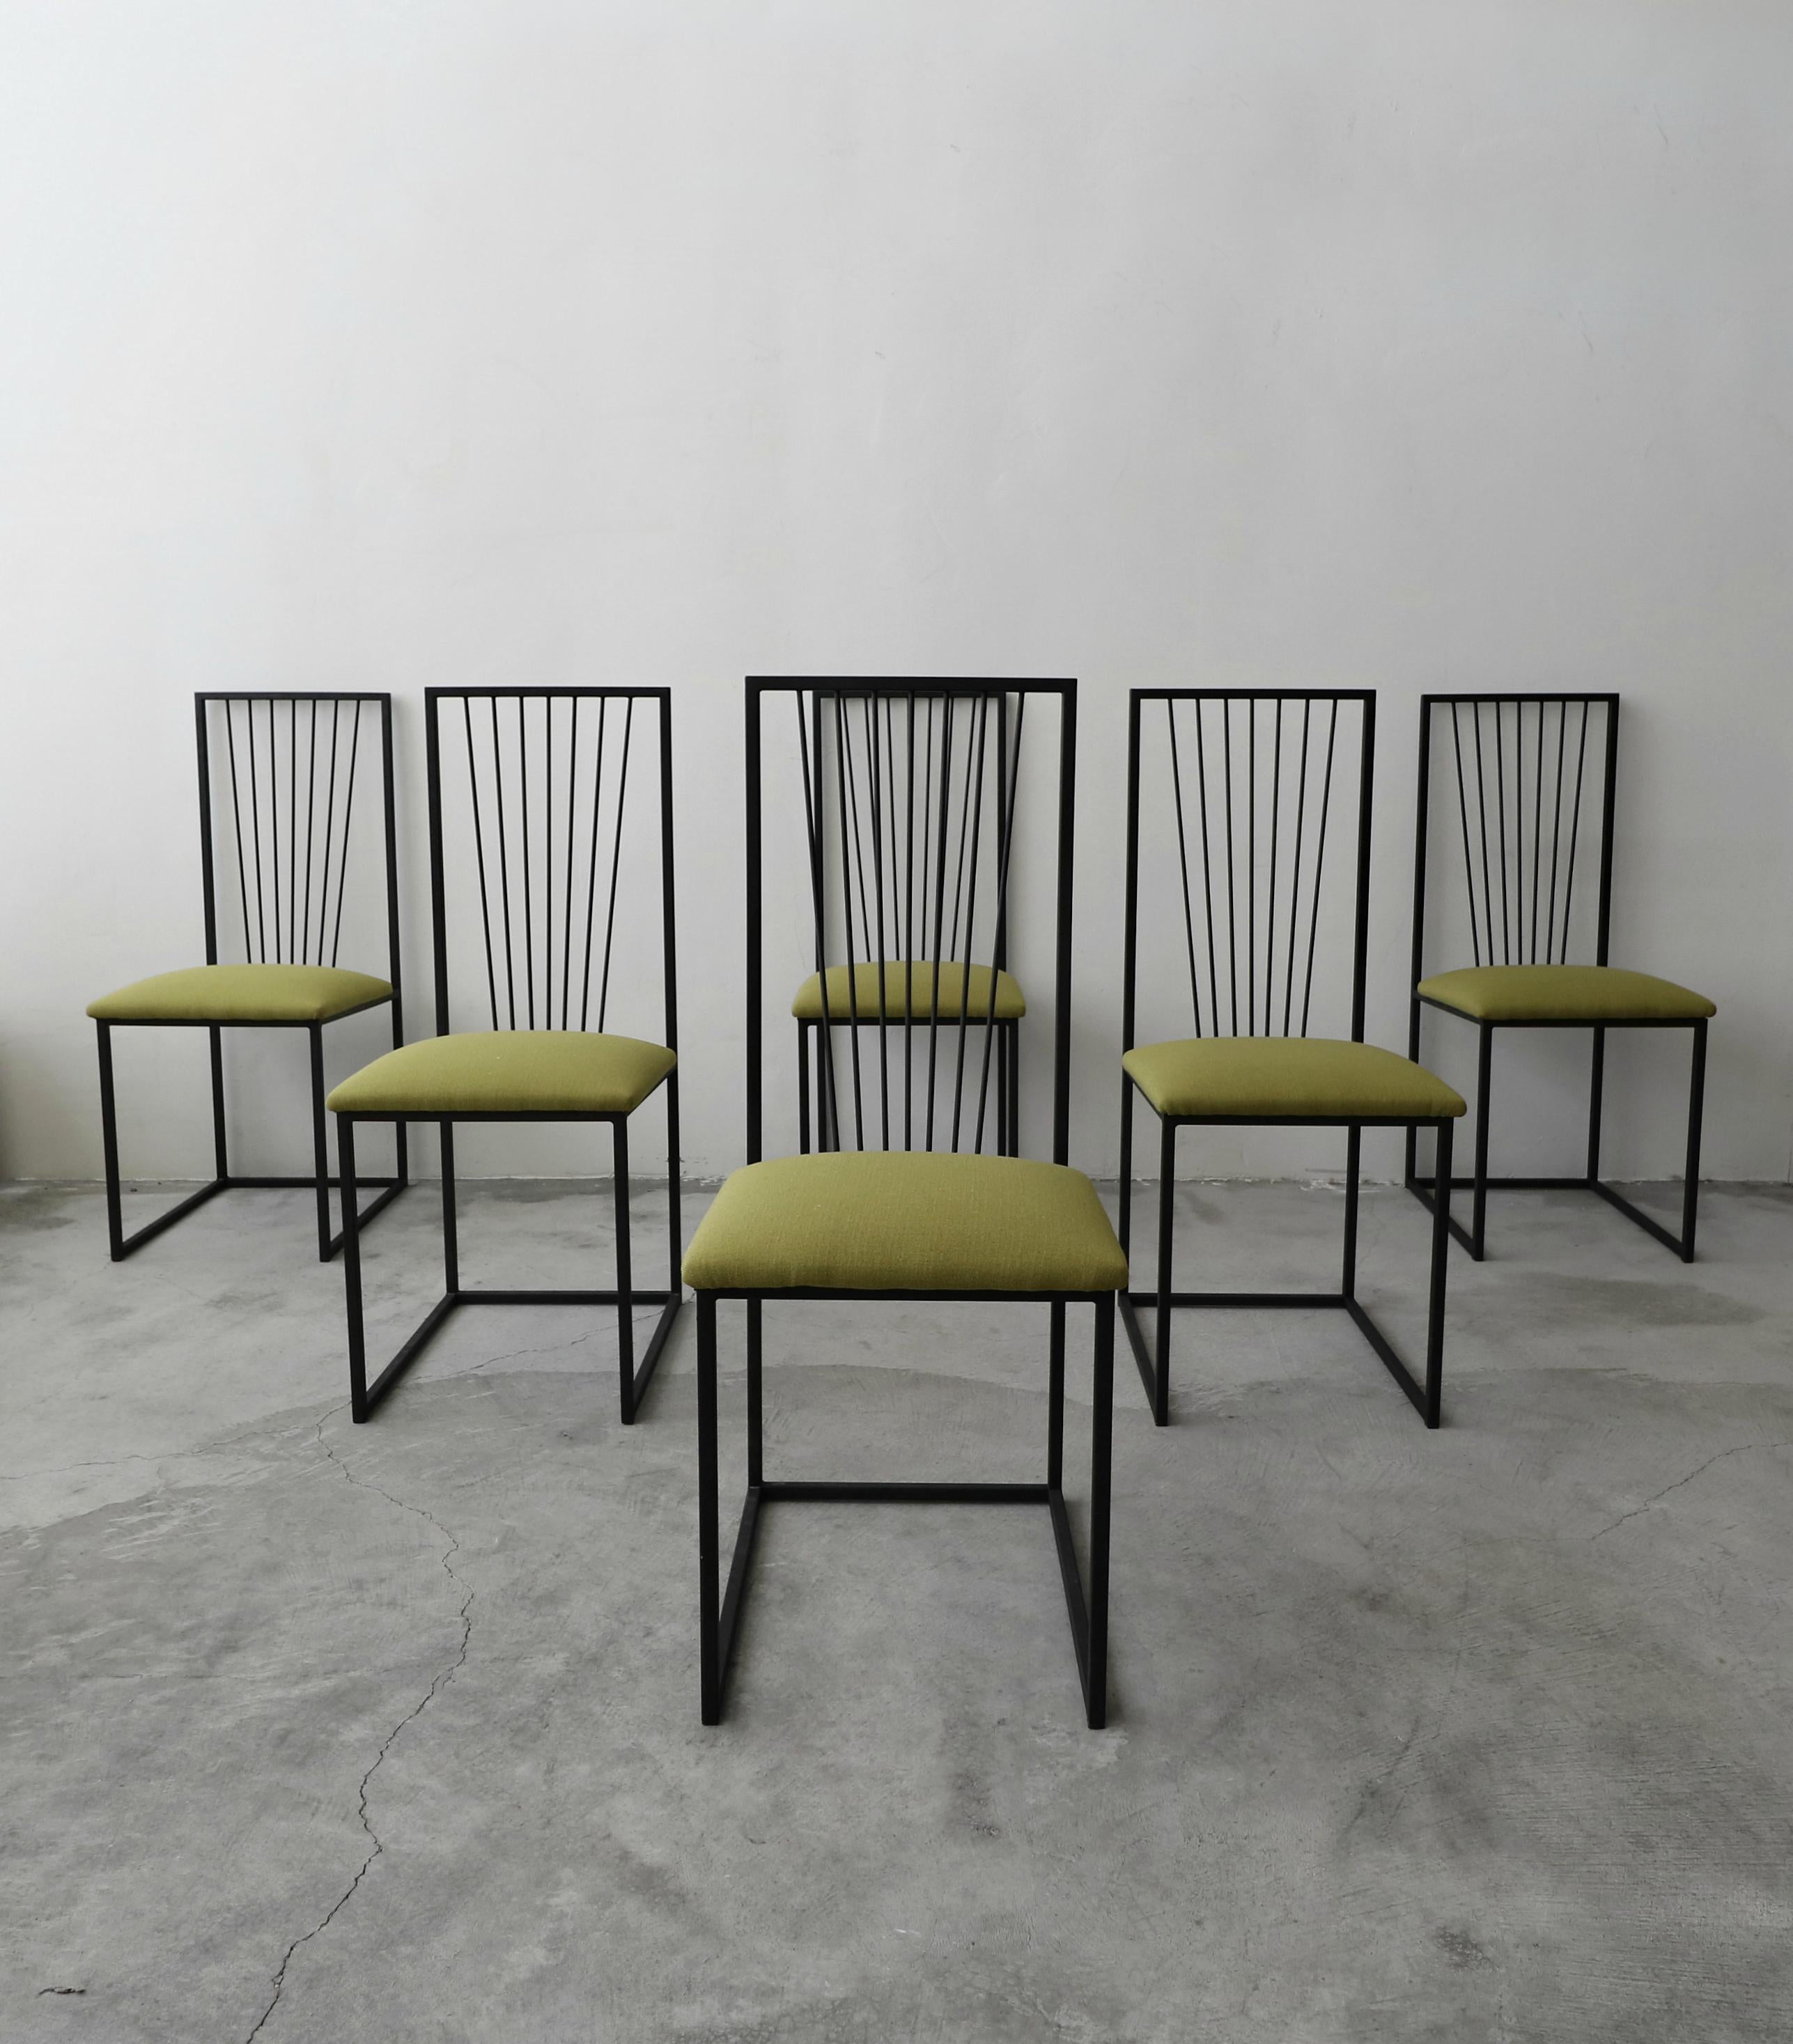 Great set of 6 Postmodern dining chairs. Constructed of metal frames, coated matte black. These beauties are the epitome of Minimalist style with the best lines. They would mesh well in many decors. 

The seats have been reupholstered and the